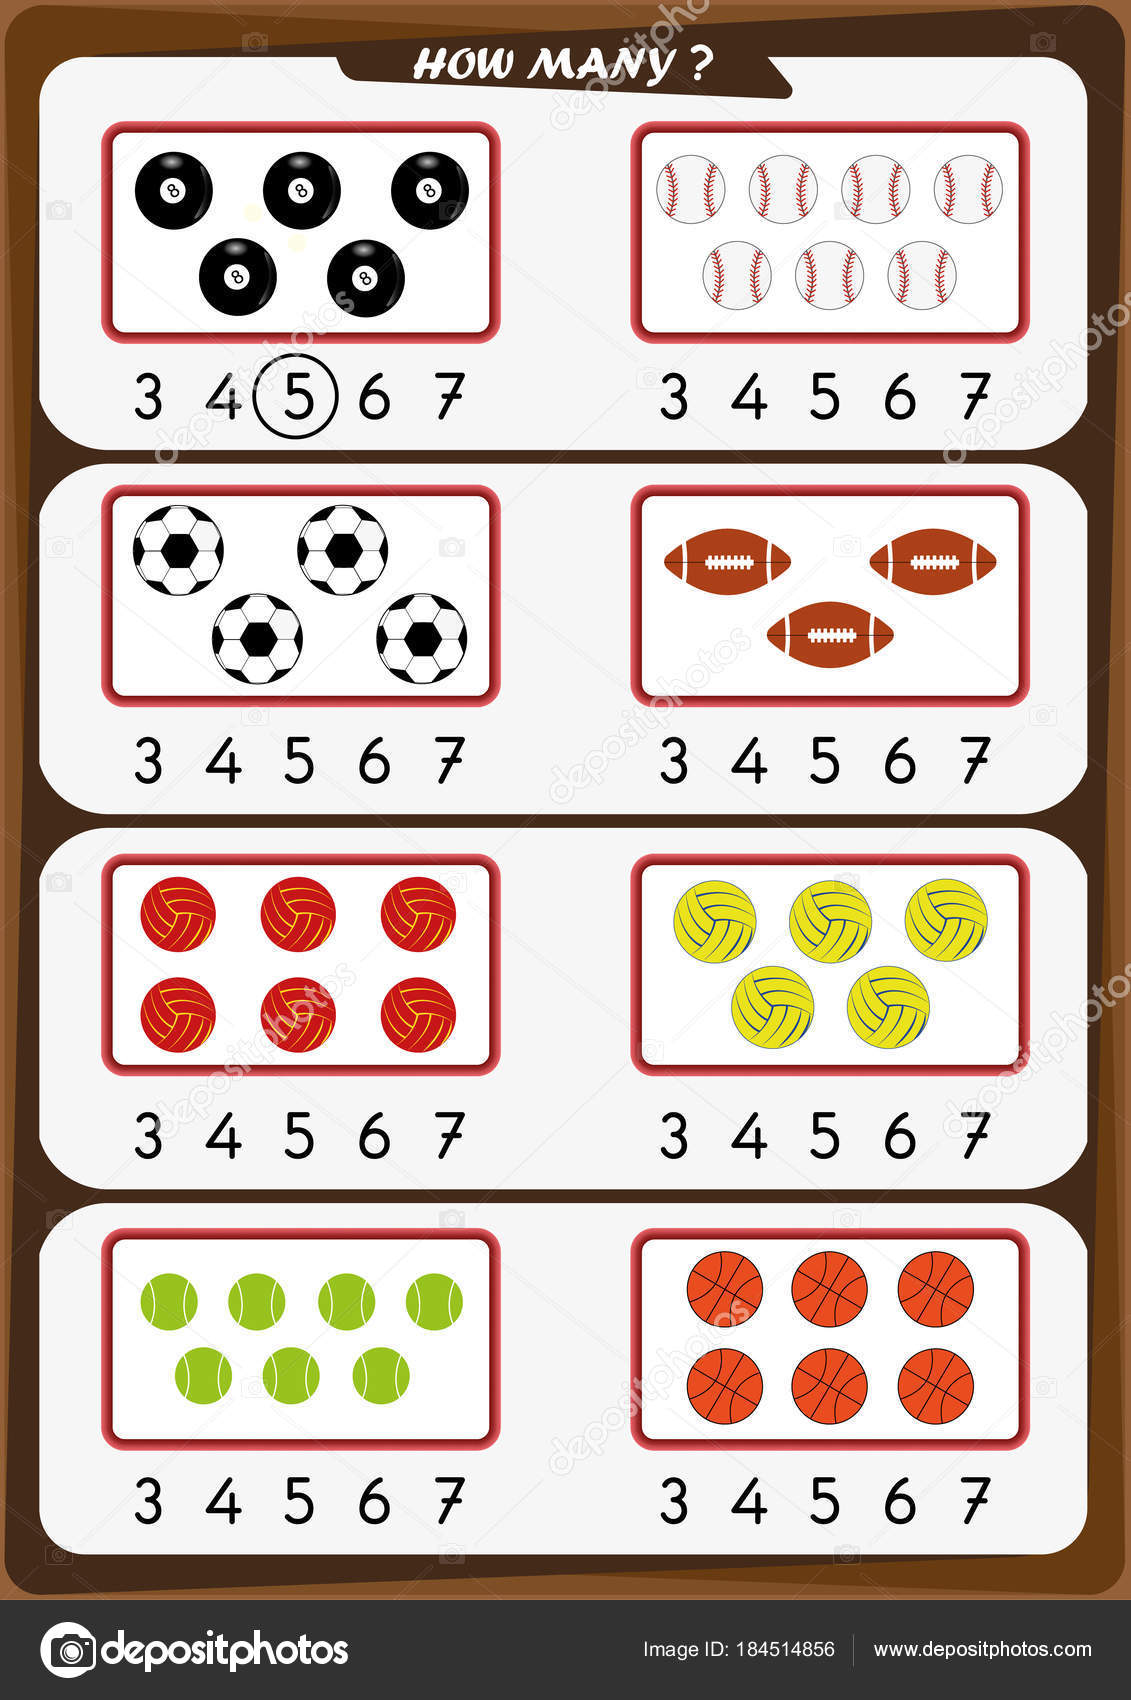 identifying-numbers-1-to-3-worksheets-for-pre-k-your-home-teacher-match-numbers-1-3-worksheet